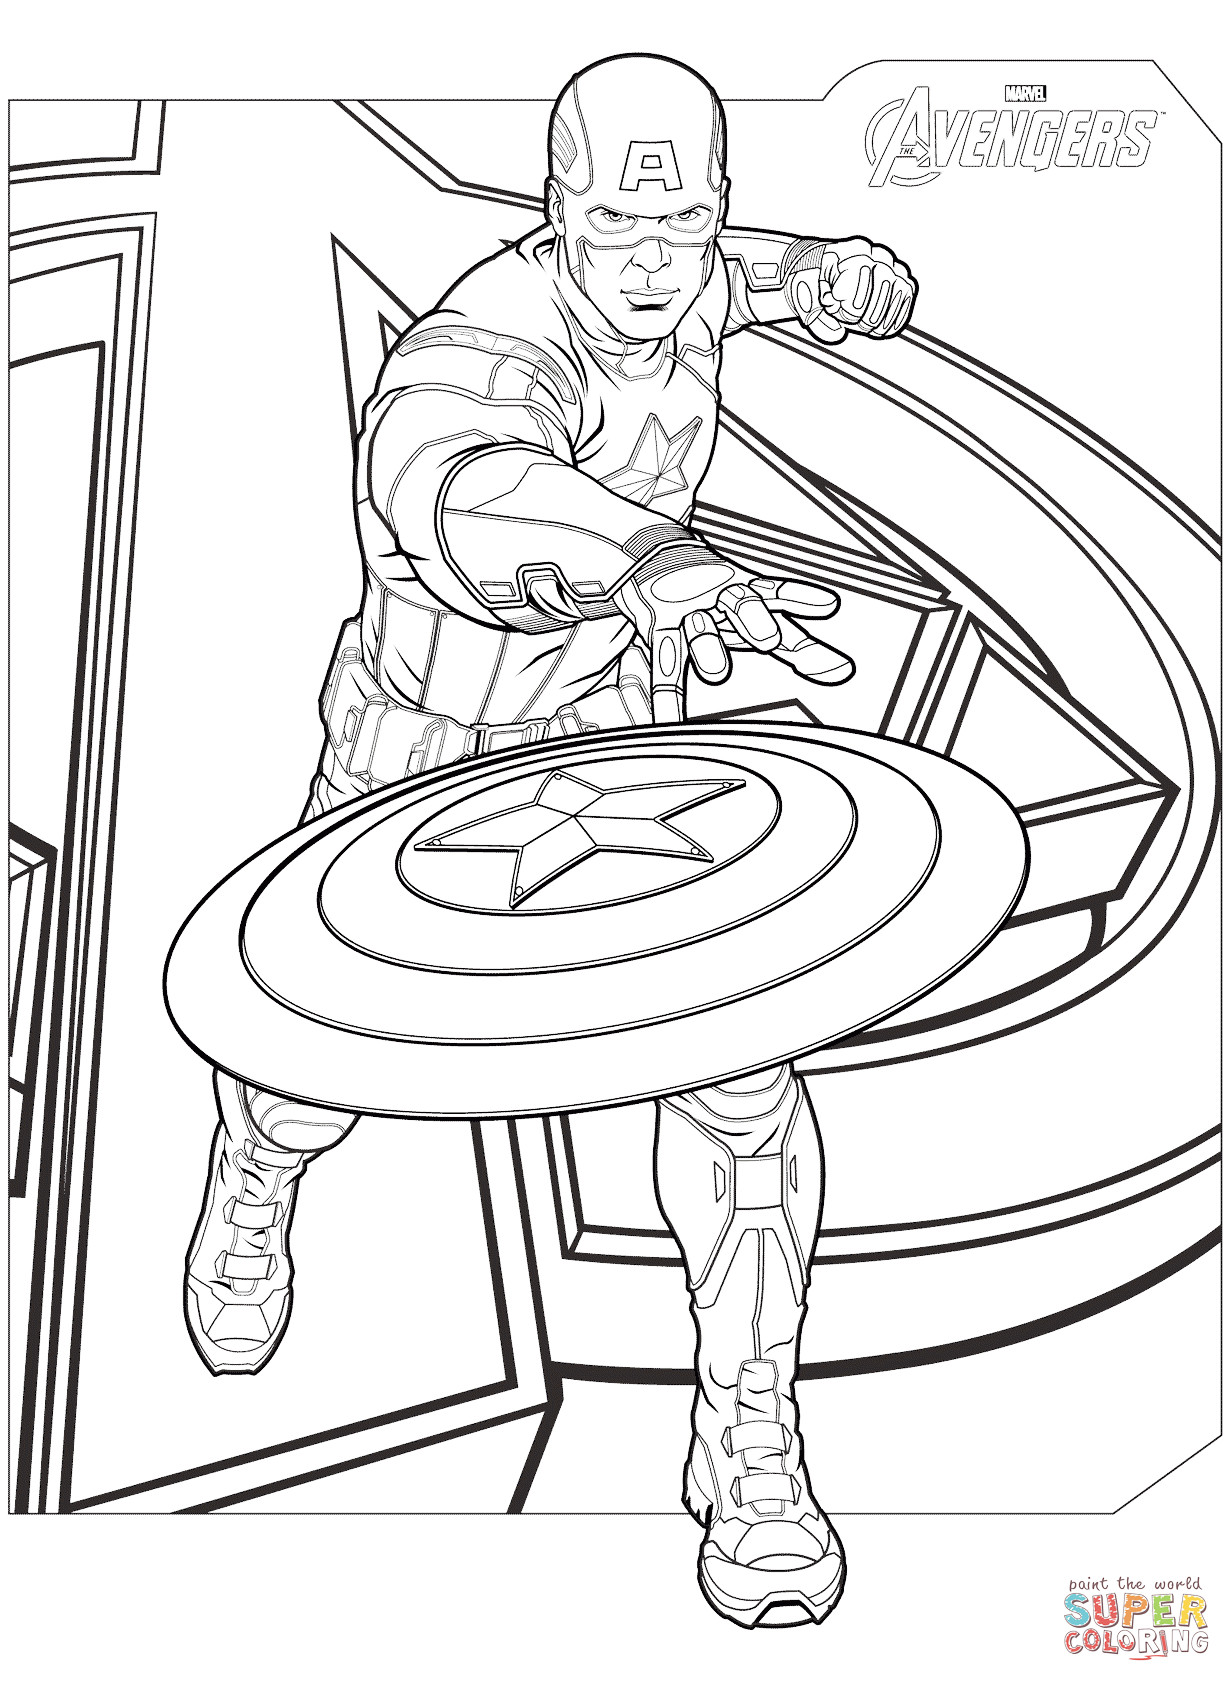 Avengers Coloring Pages Printable
 Avengers Captain America coloring page